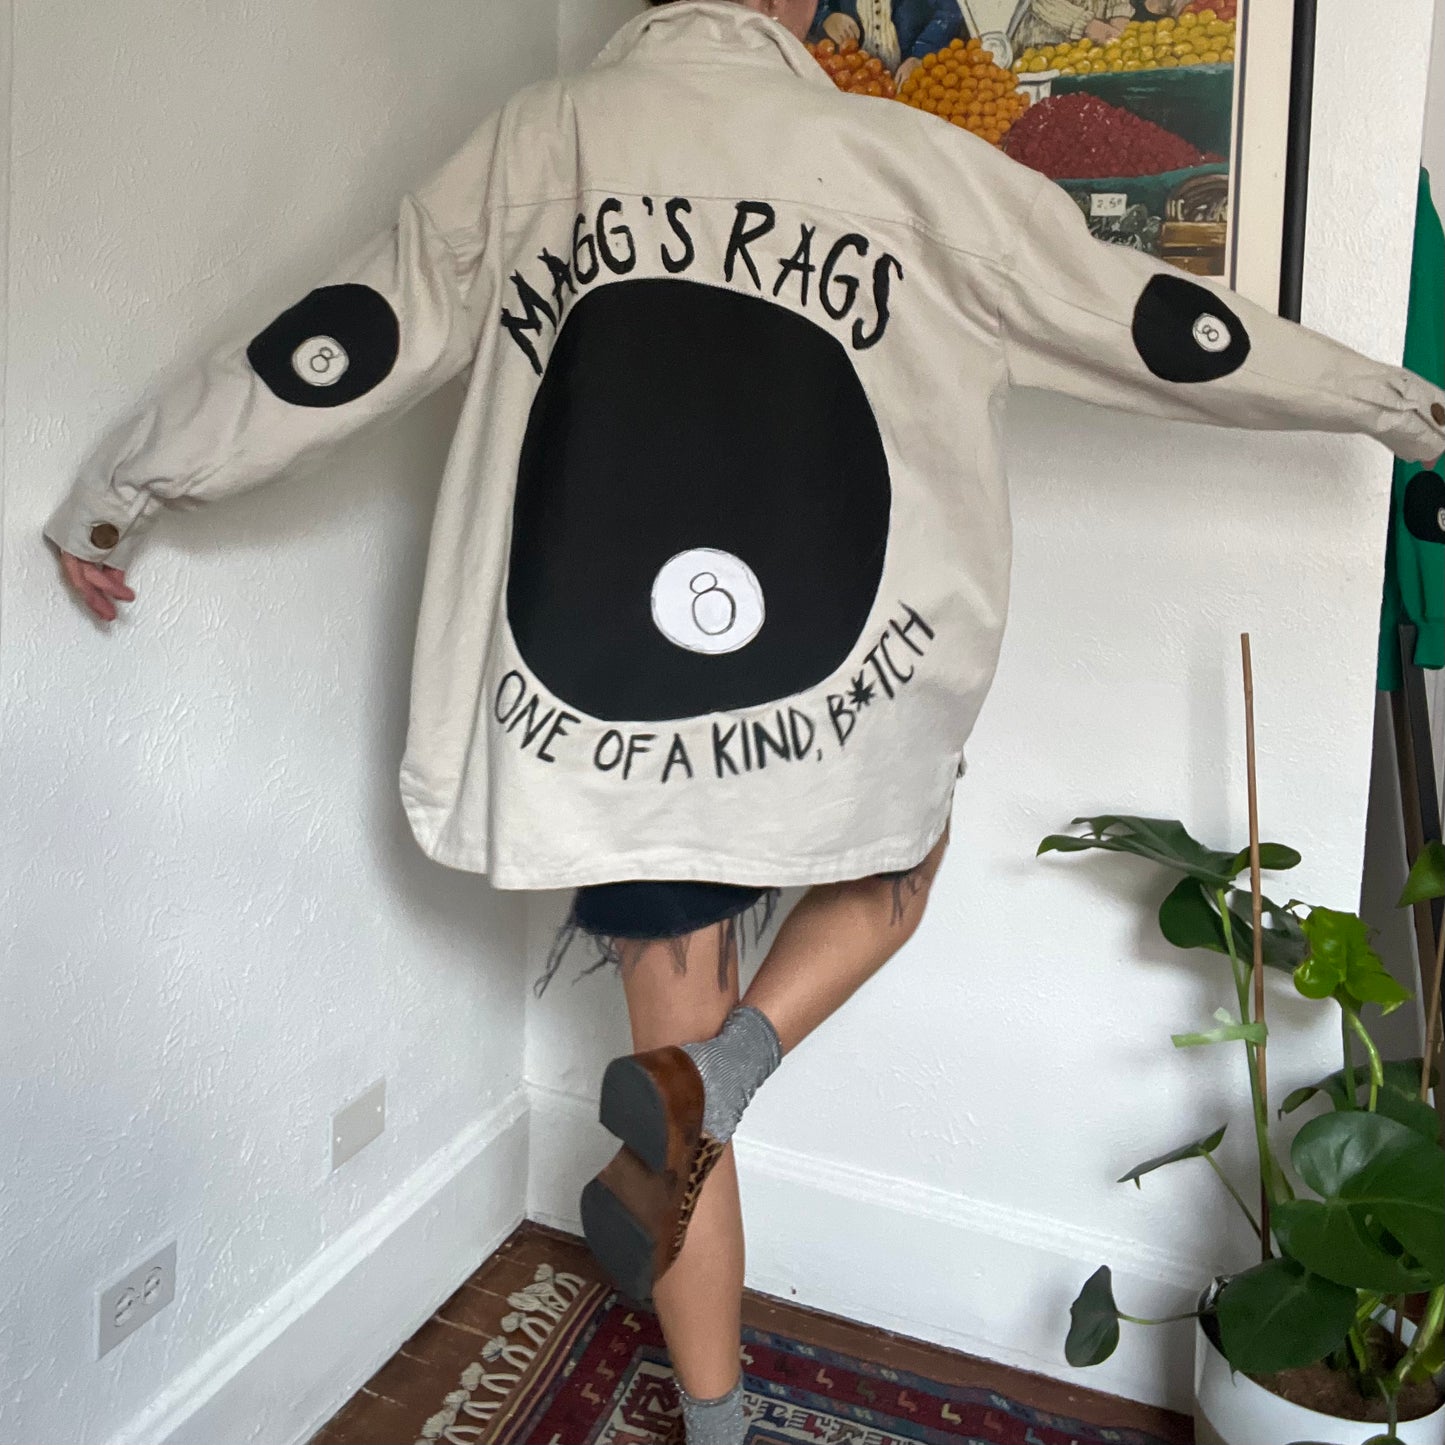 Magg’s Rags Canvas coat